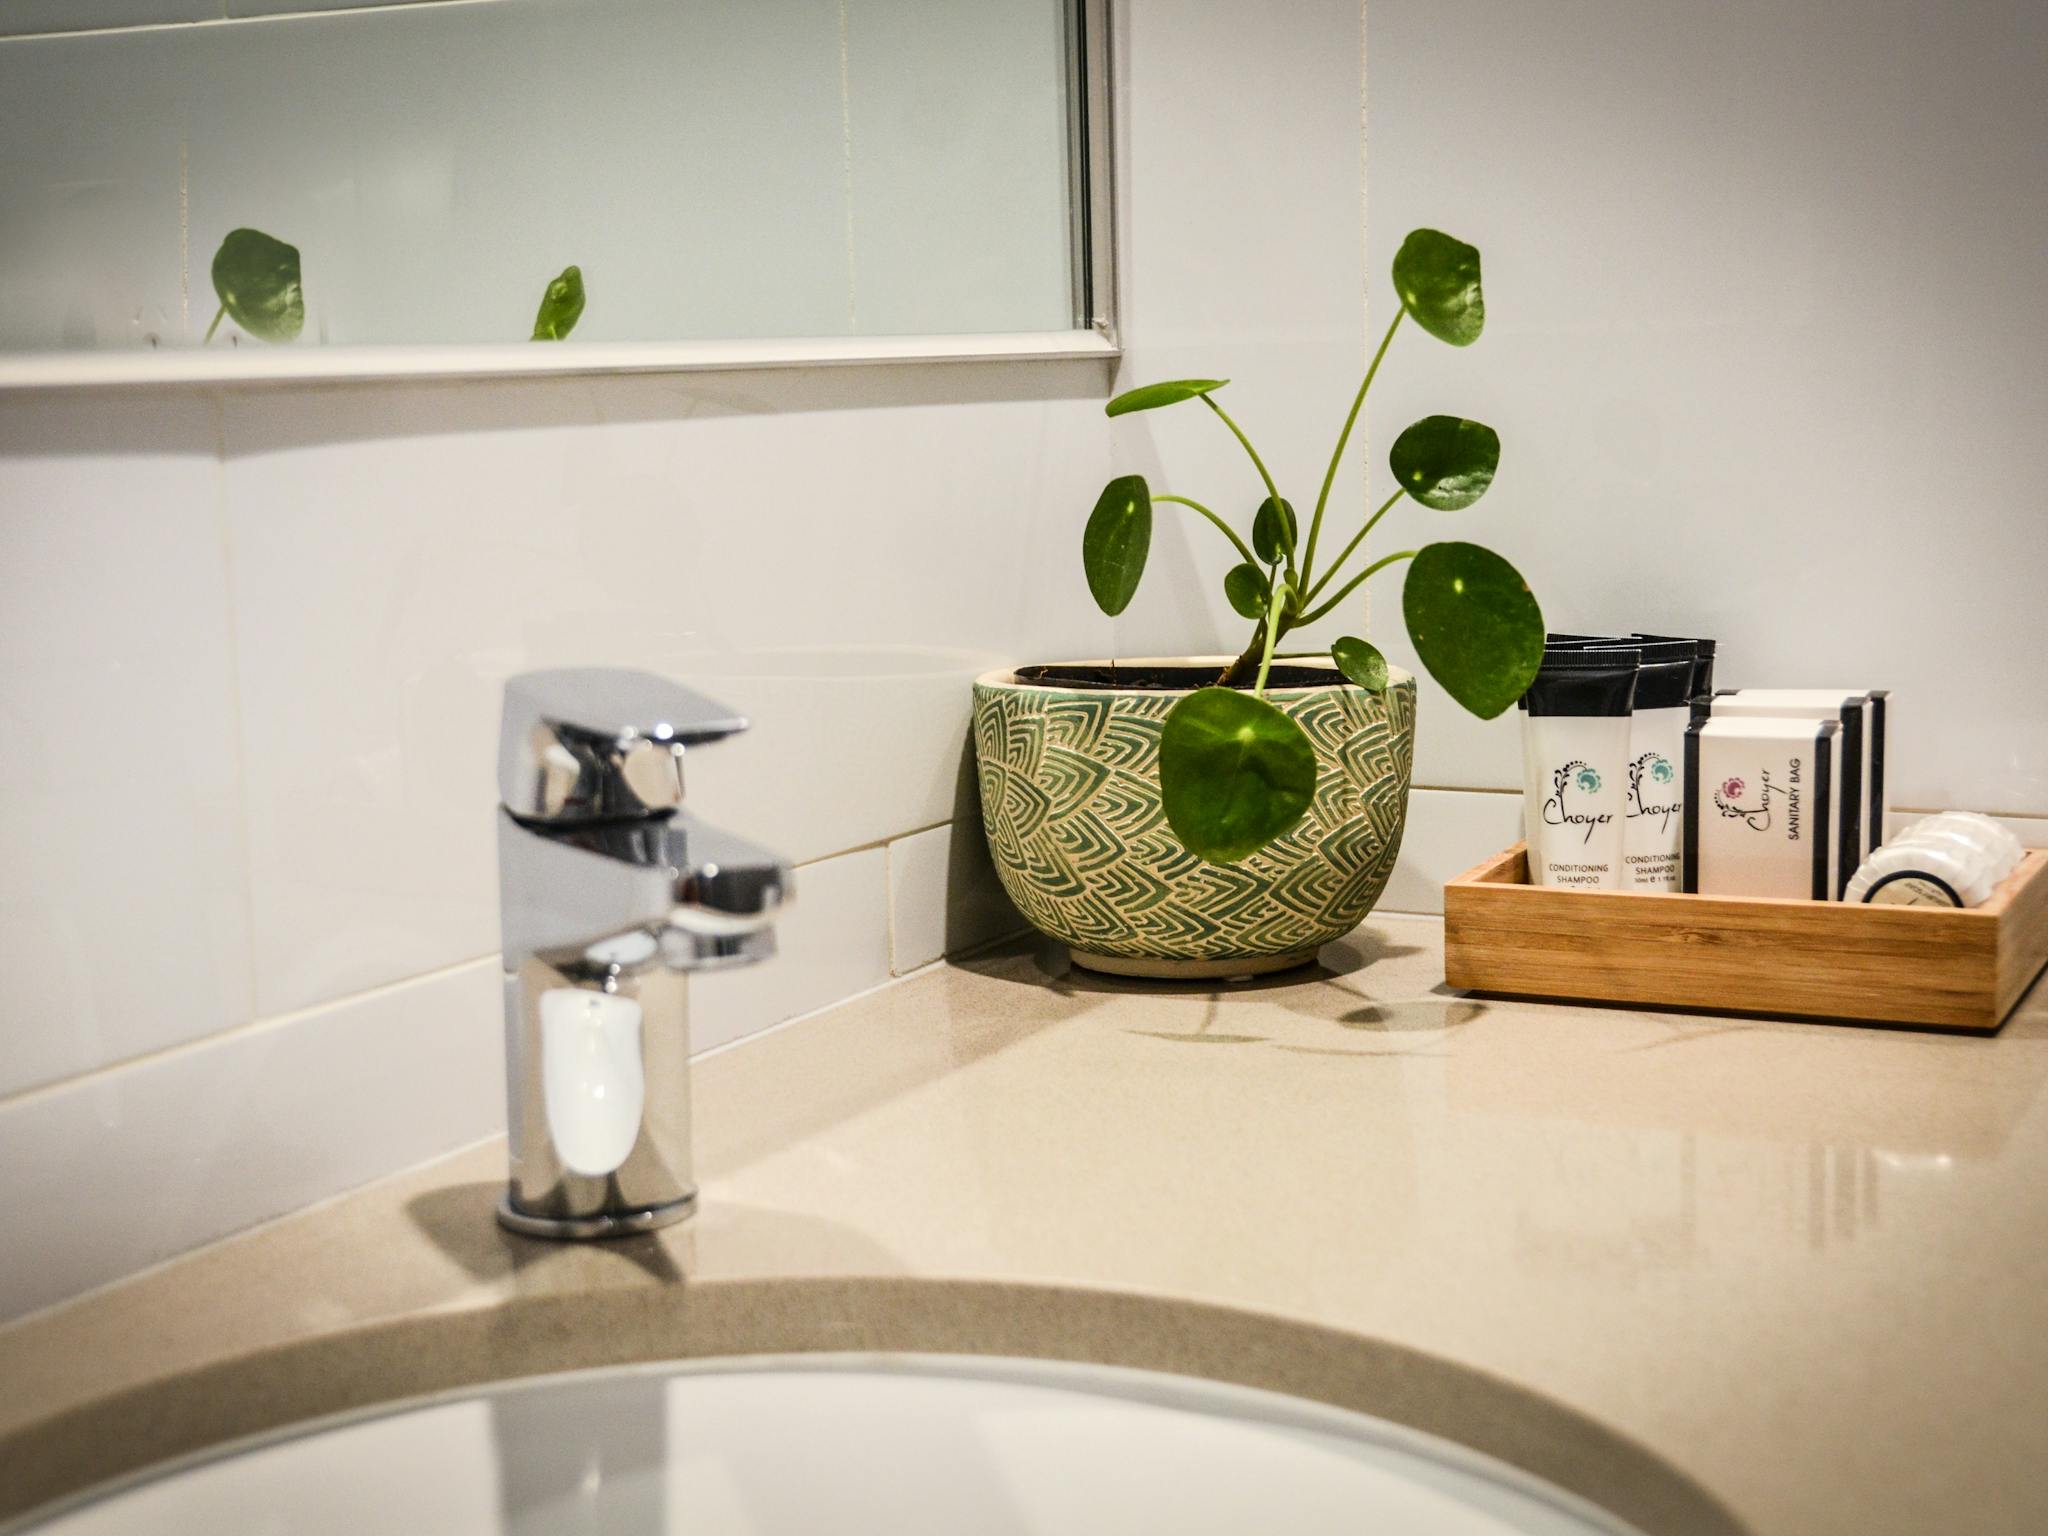 Mansfield Apartments offer modern ensuite bathrooms with complimentary toiletries